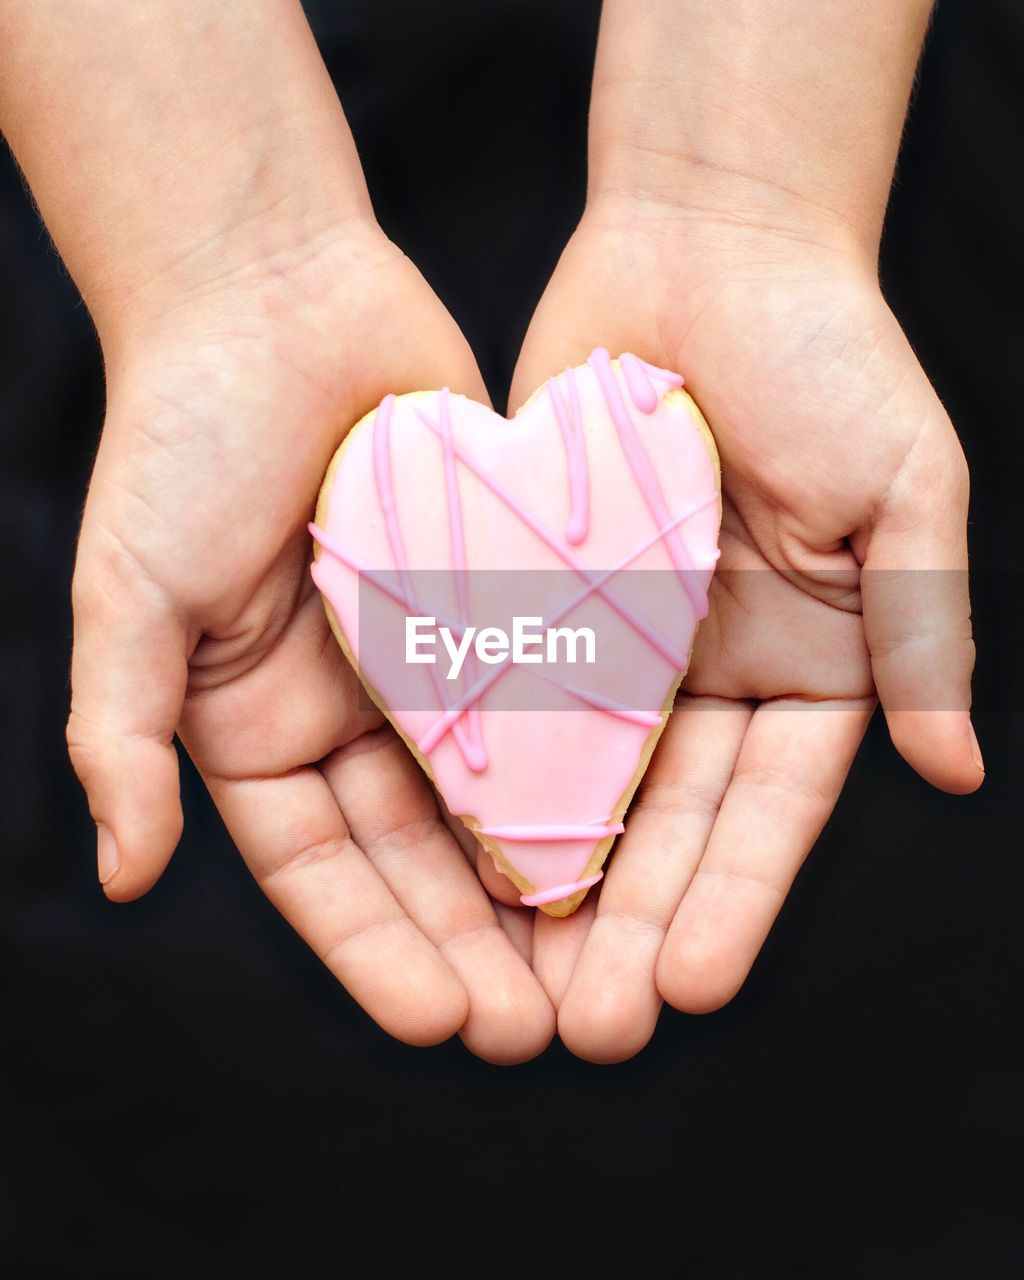 Cropped image of person holding heart shape cake against black background